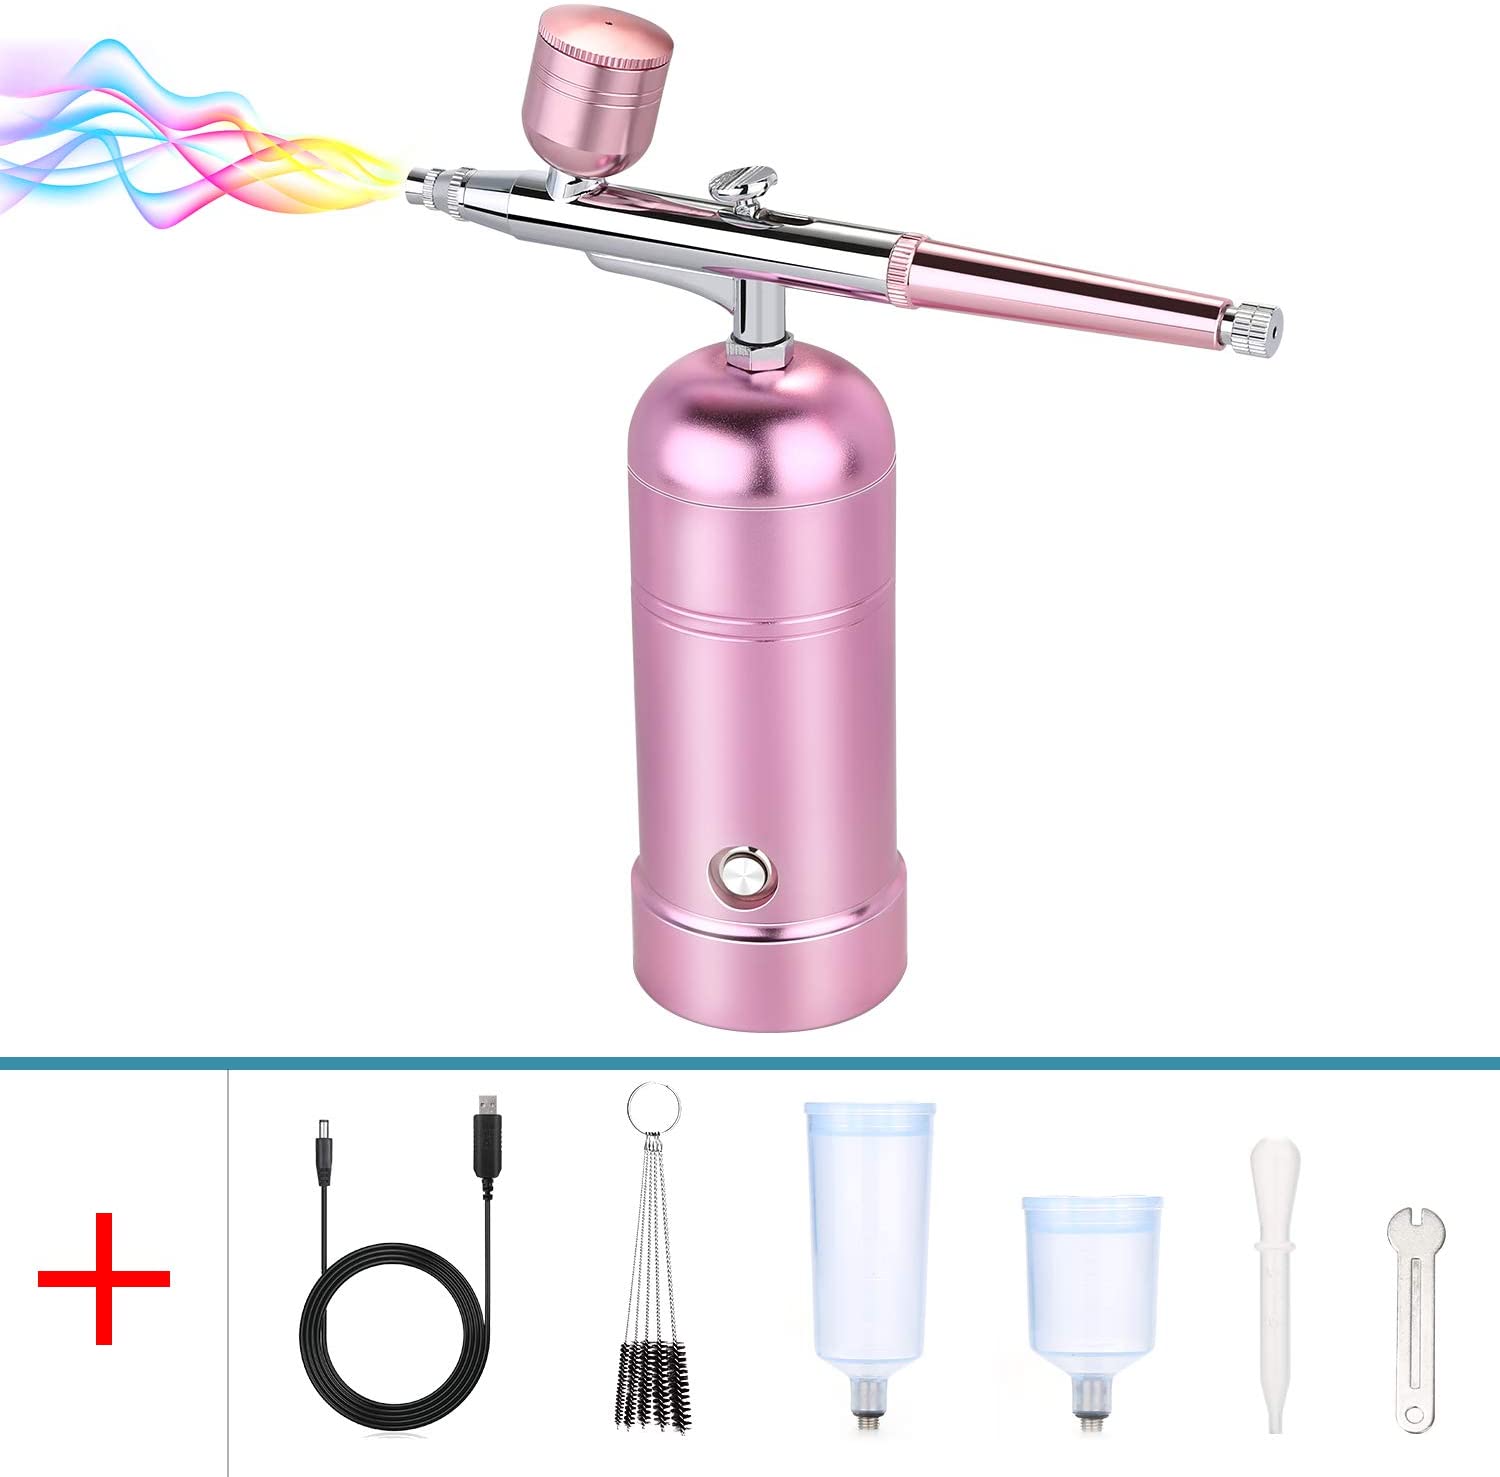 Airbrush Kit with Compressor, Portable Handheld Airbrush Pen, Rechargeable  Airbrush Gun, Portable Handheld Cordless Air Brushes for Tattoo,Painting,  Makeup, Nail Airbrush Machine, Purple 